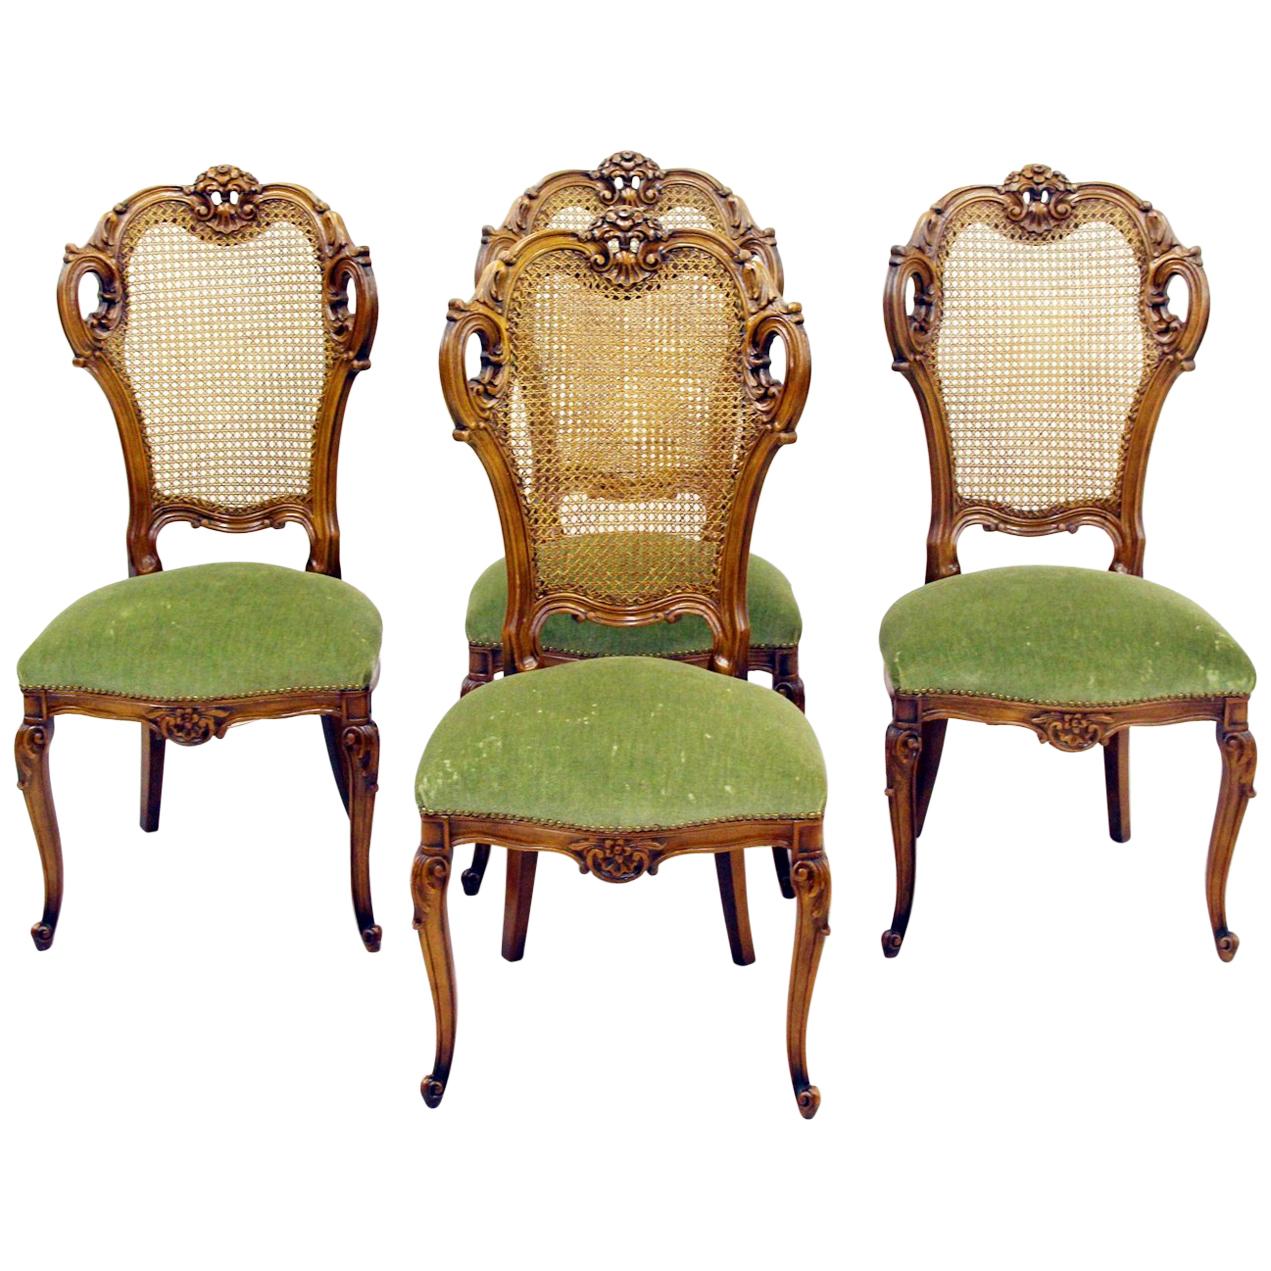 4 Chippendale Chairs Armchair Club Chair Baroque Antique im Angebot